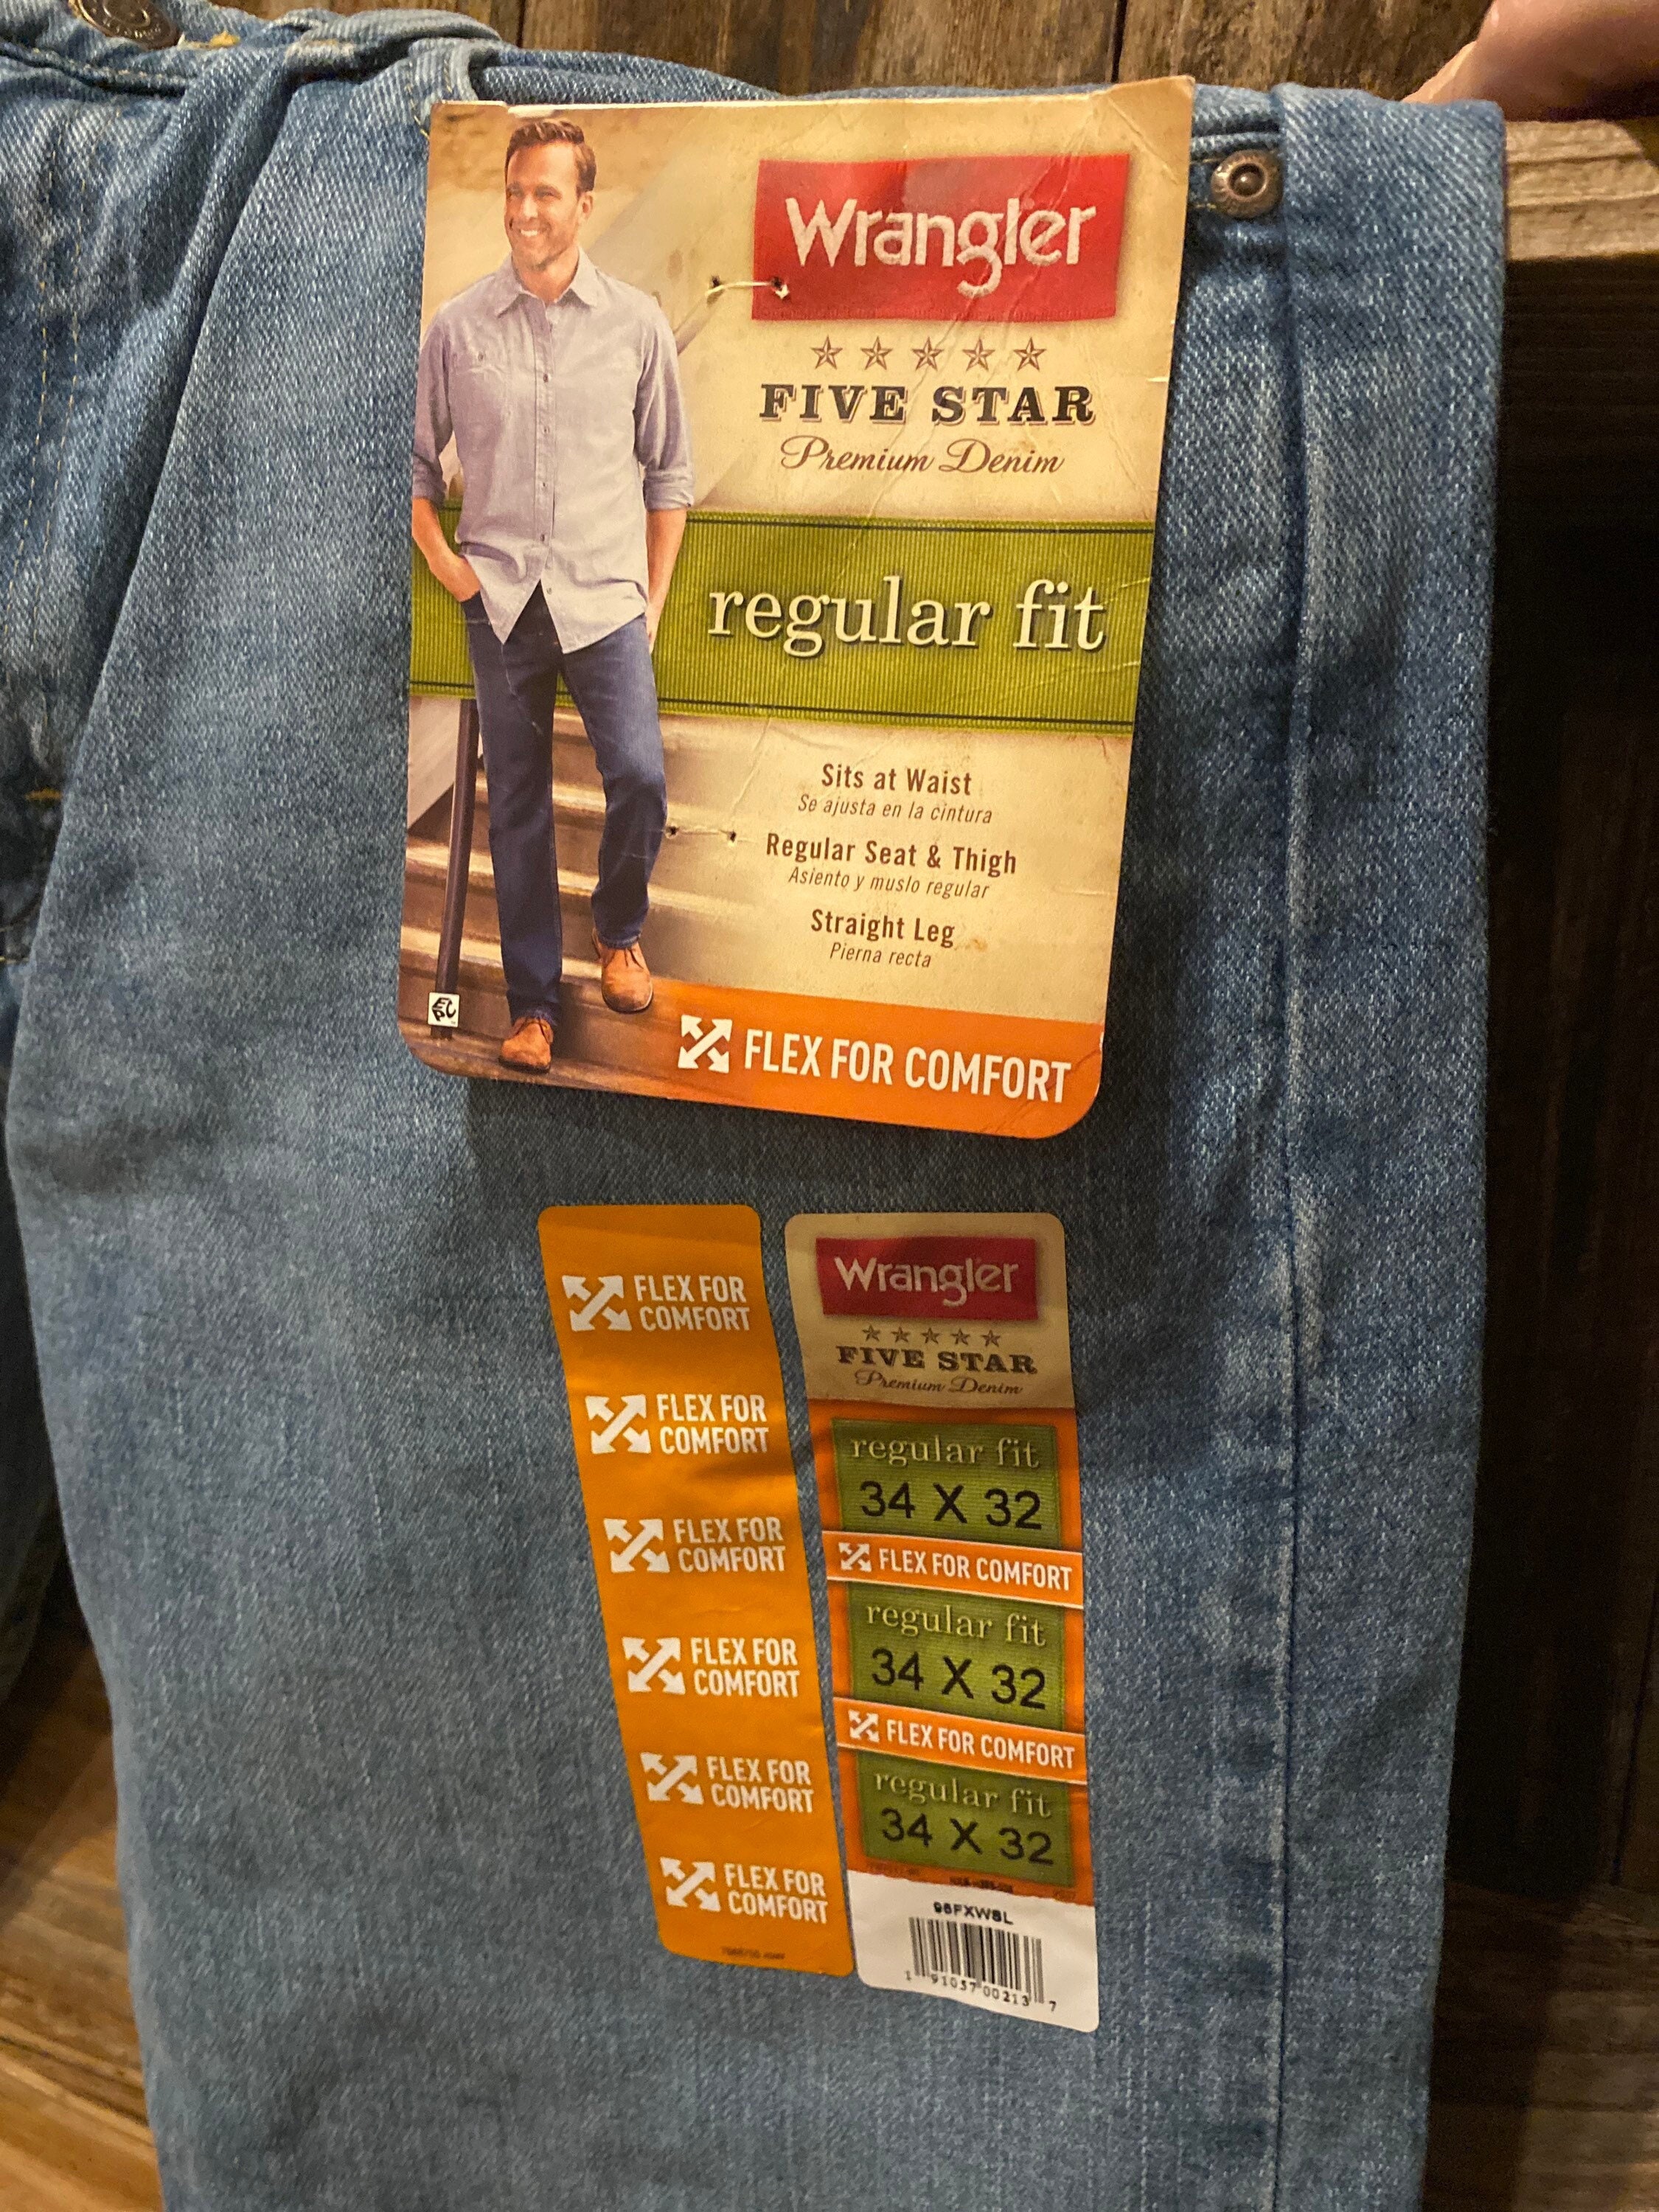 NWT Wrangler Jeans 34x32 Regular Fit Flex Comfort Mens Blue Jeans, Great  Buy Great Gift Same Day Shipping -  India